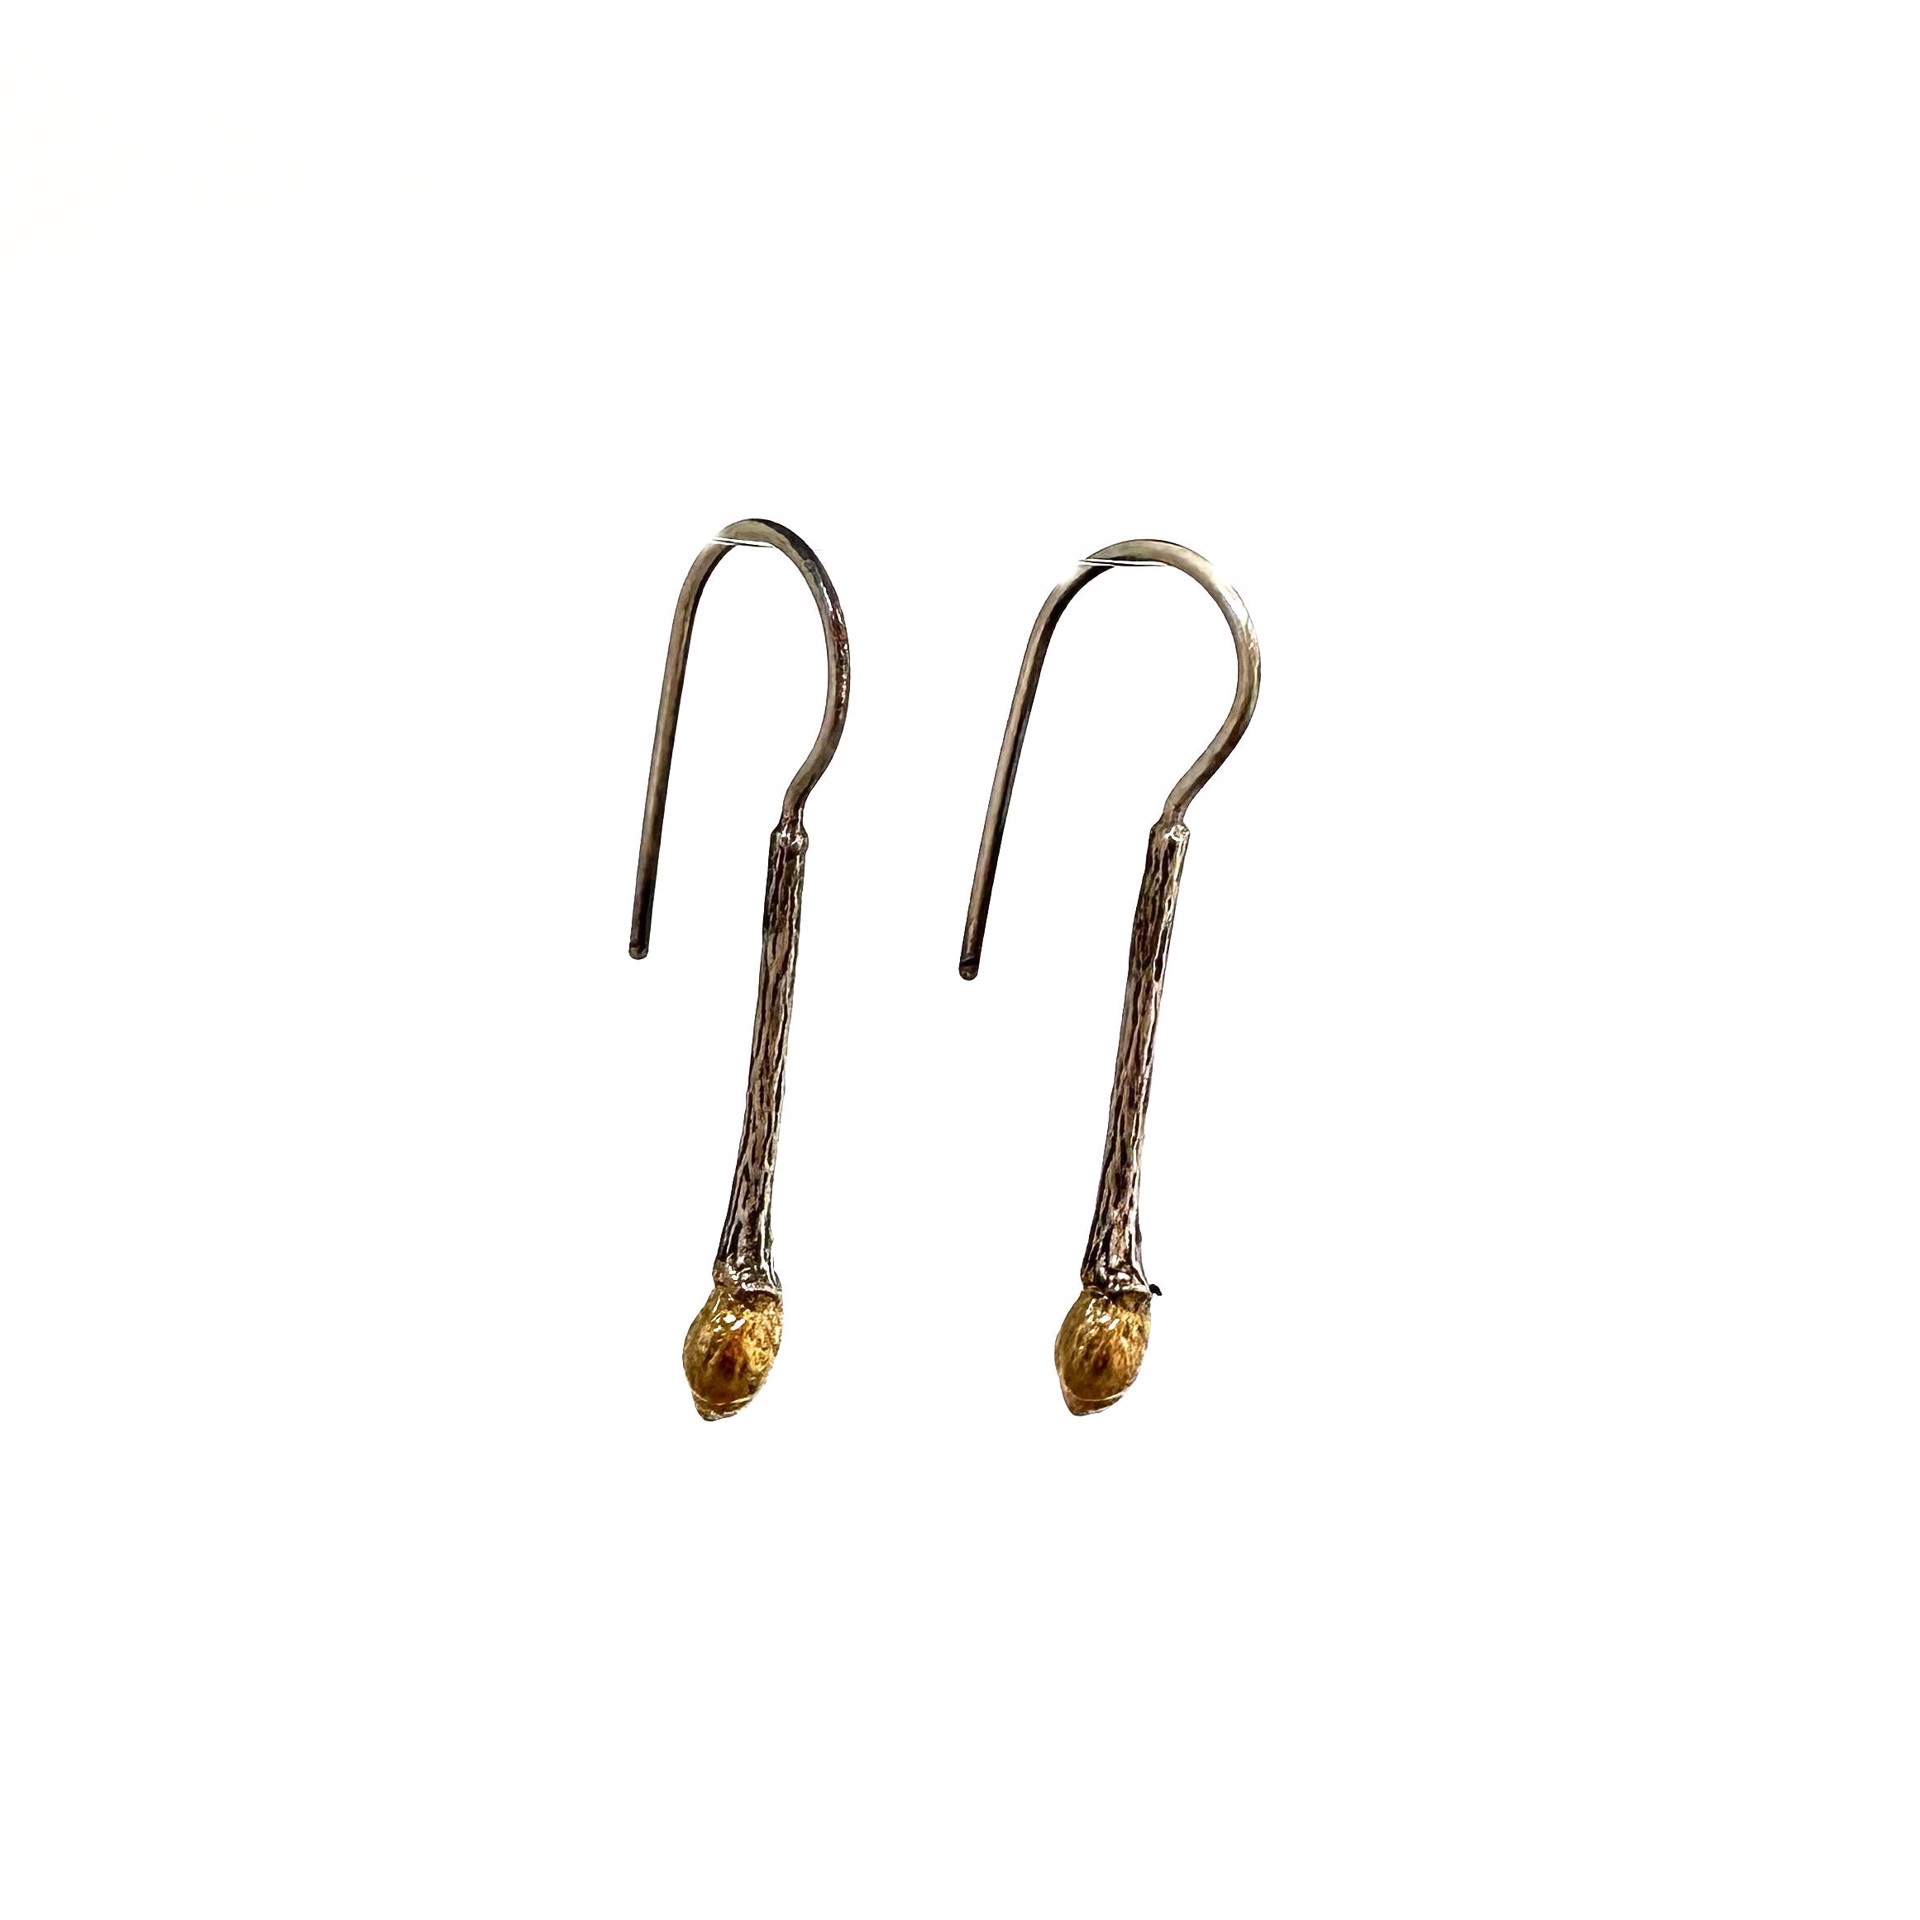 Linden earrings w/ 24k by Sara Thompson